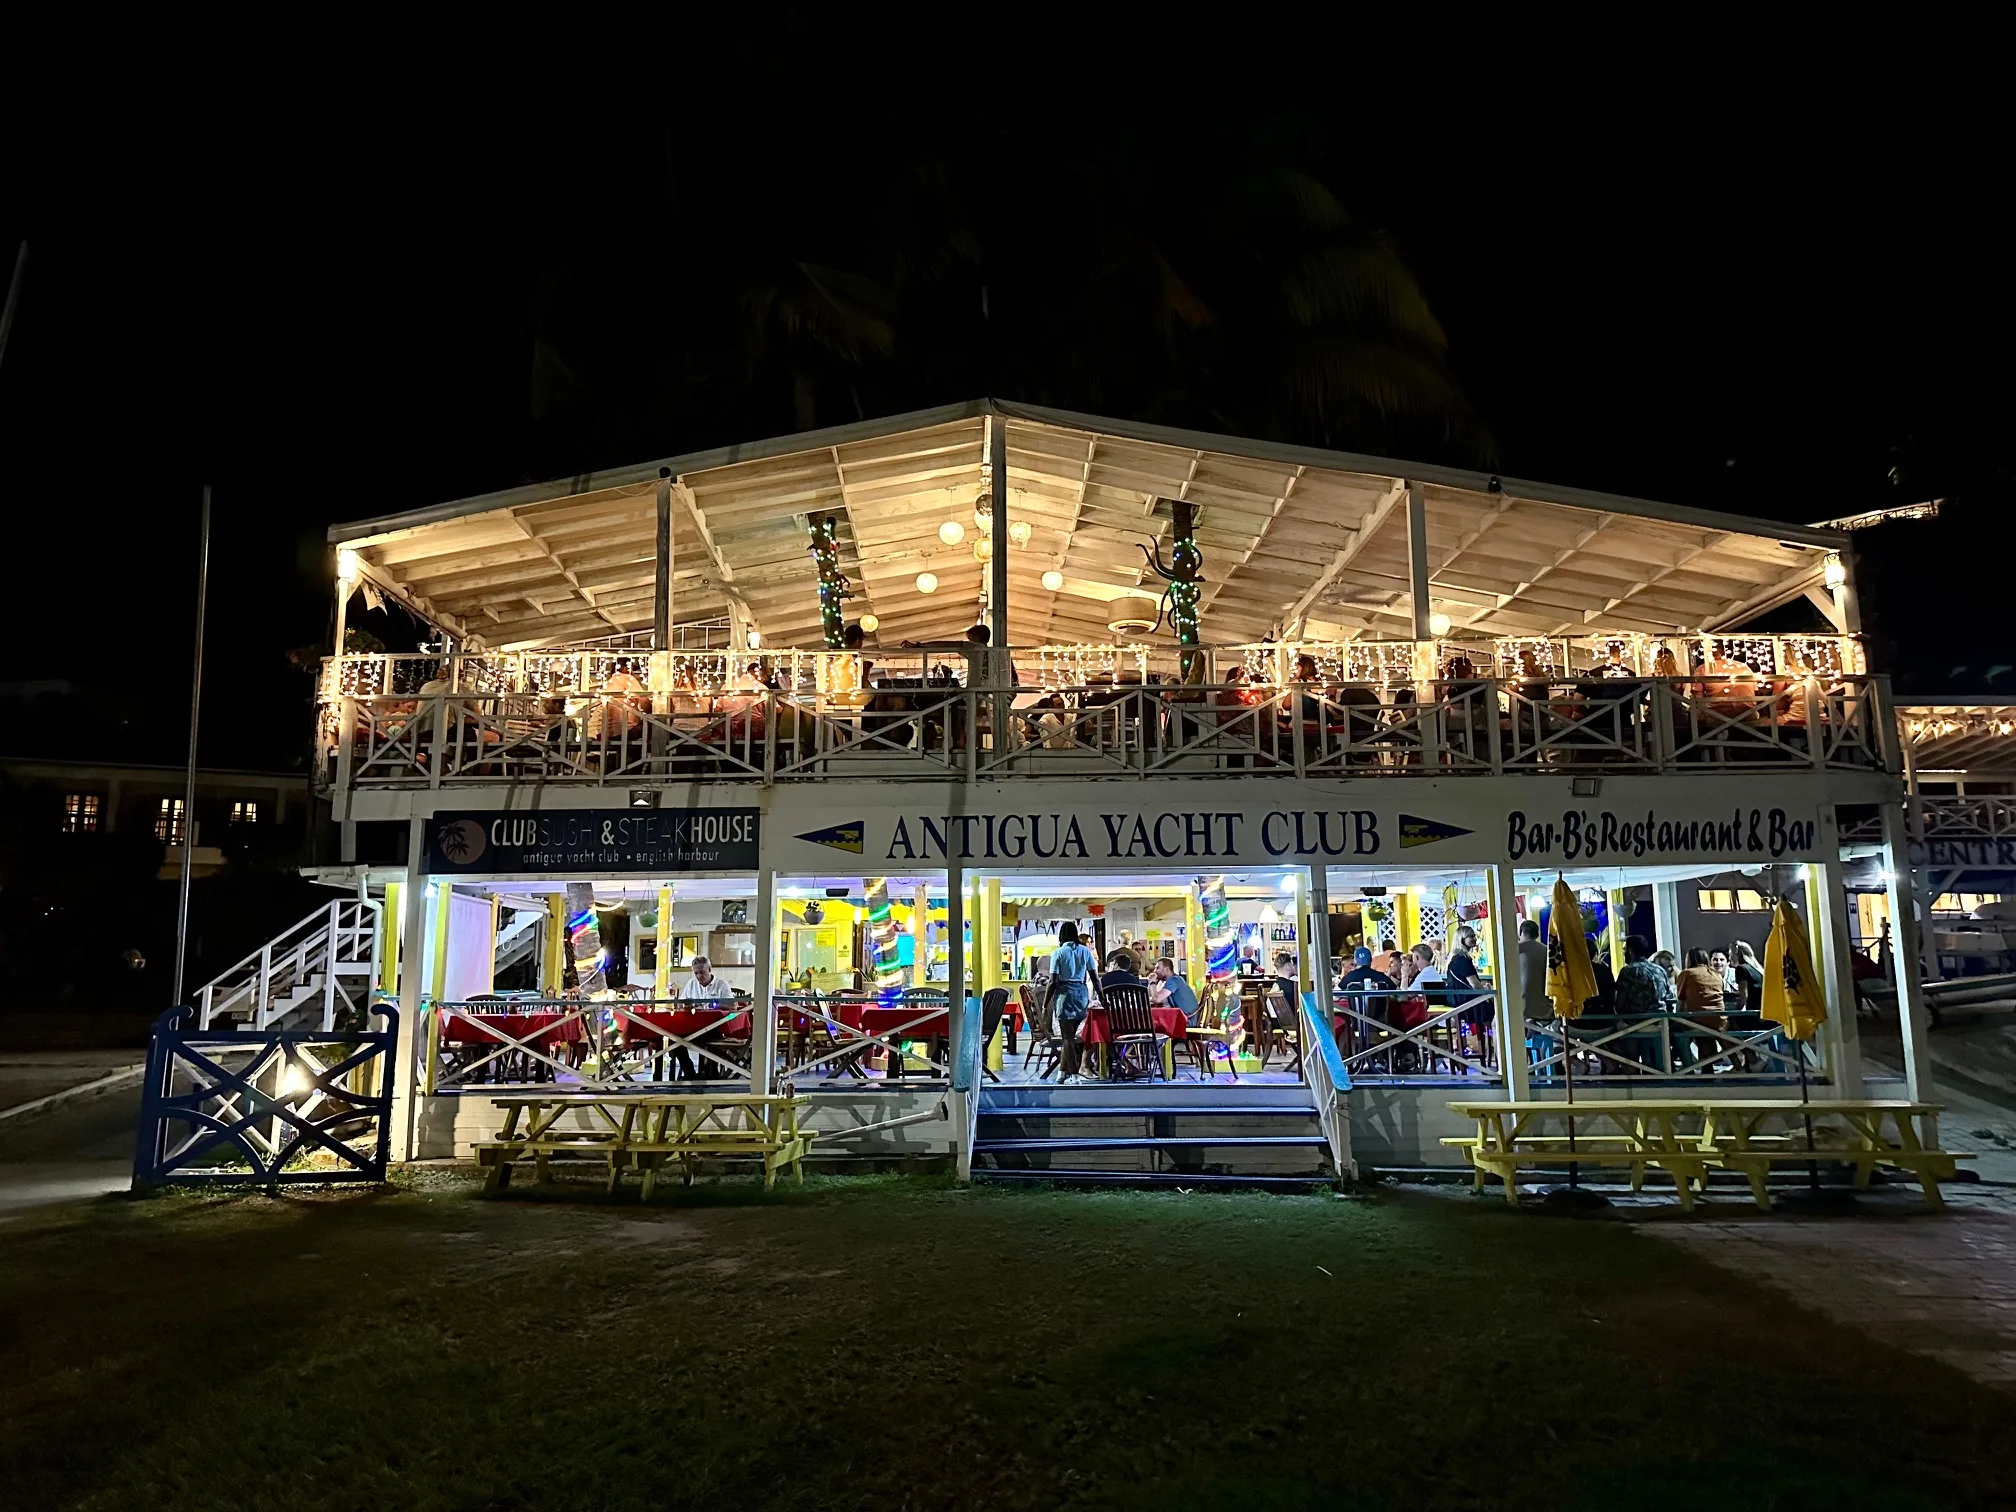 The Antigua Yatch Club in English Harbor during the night